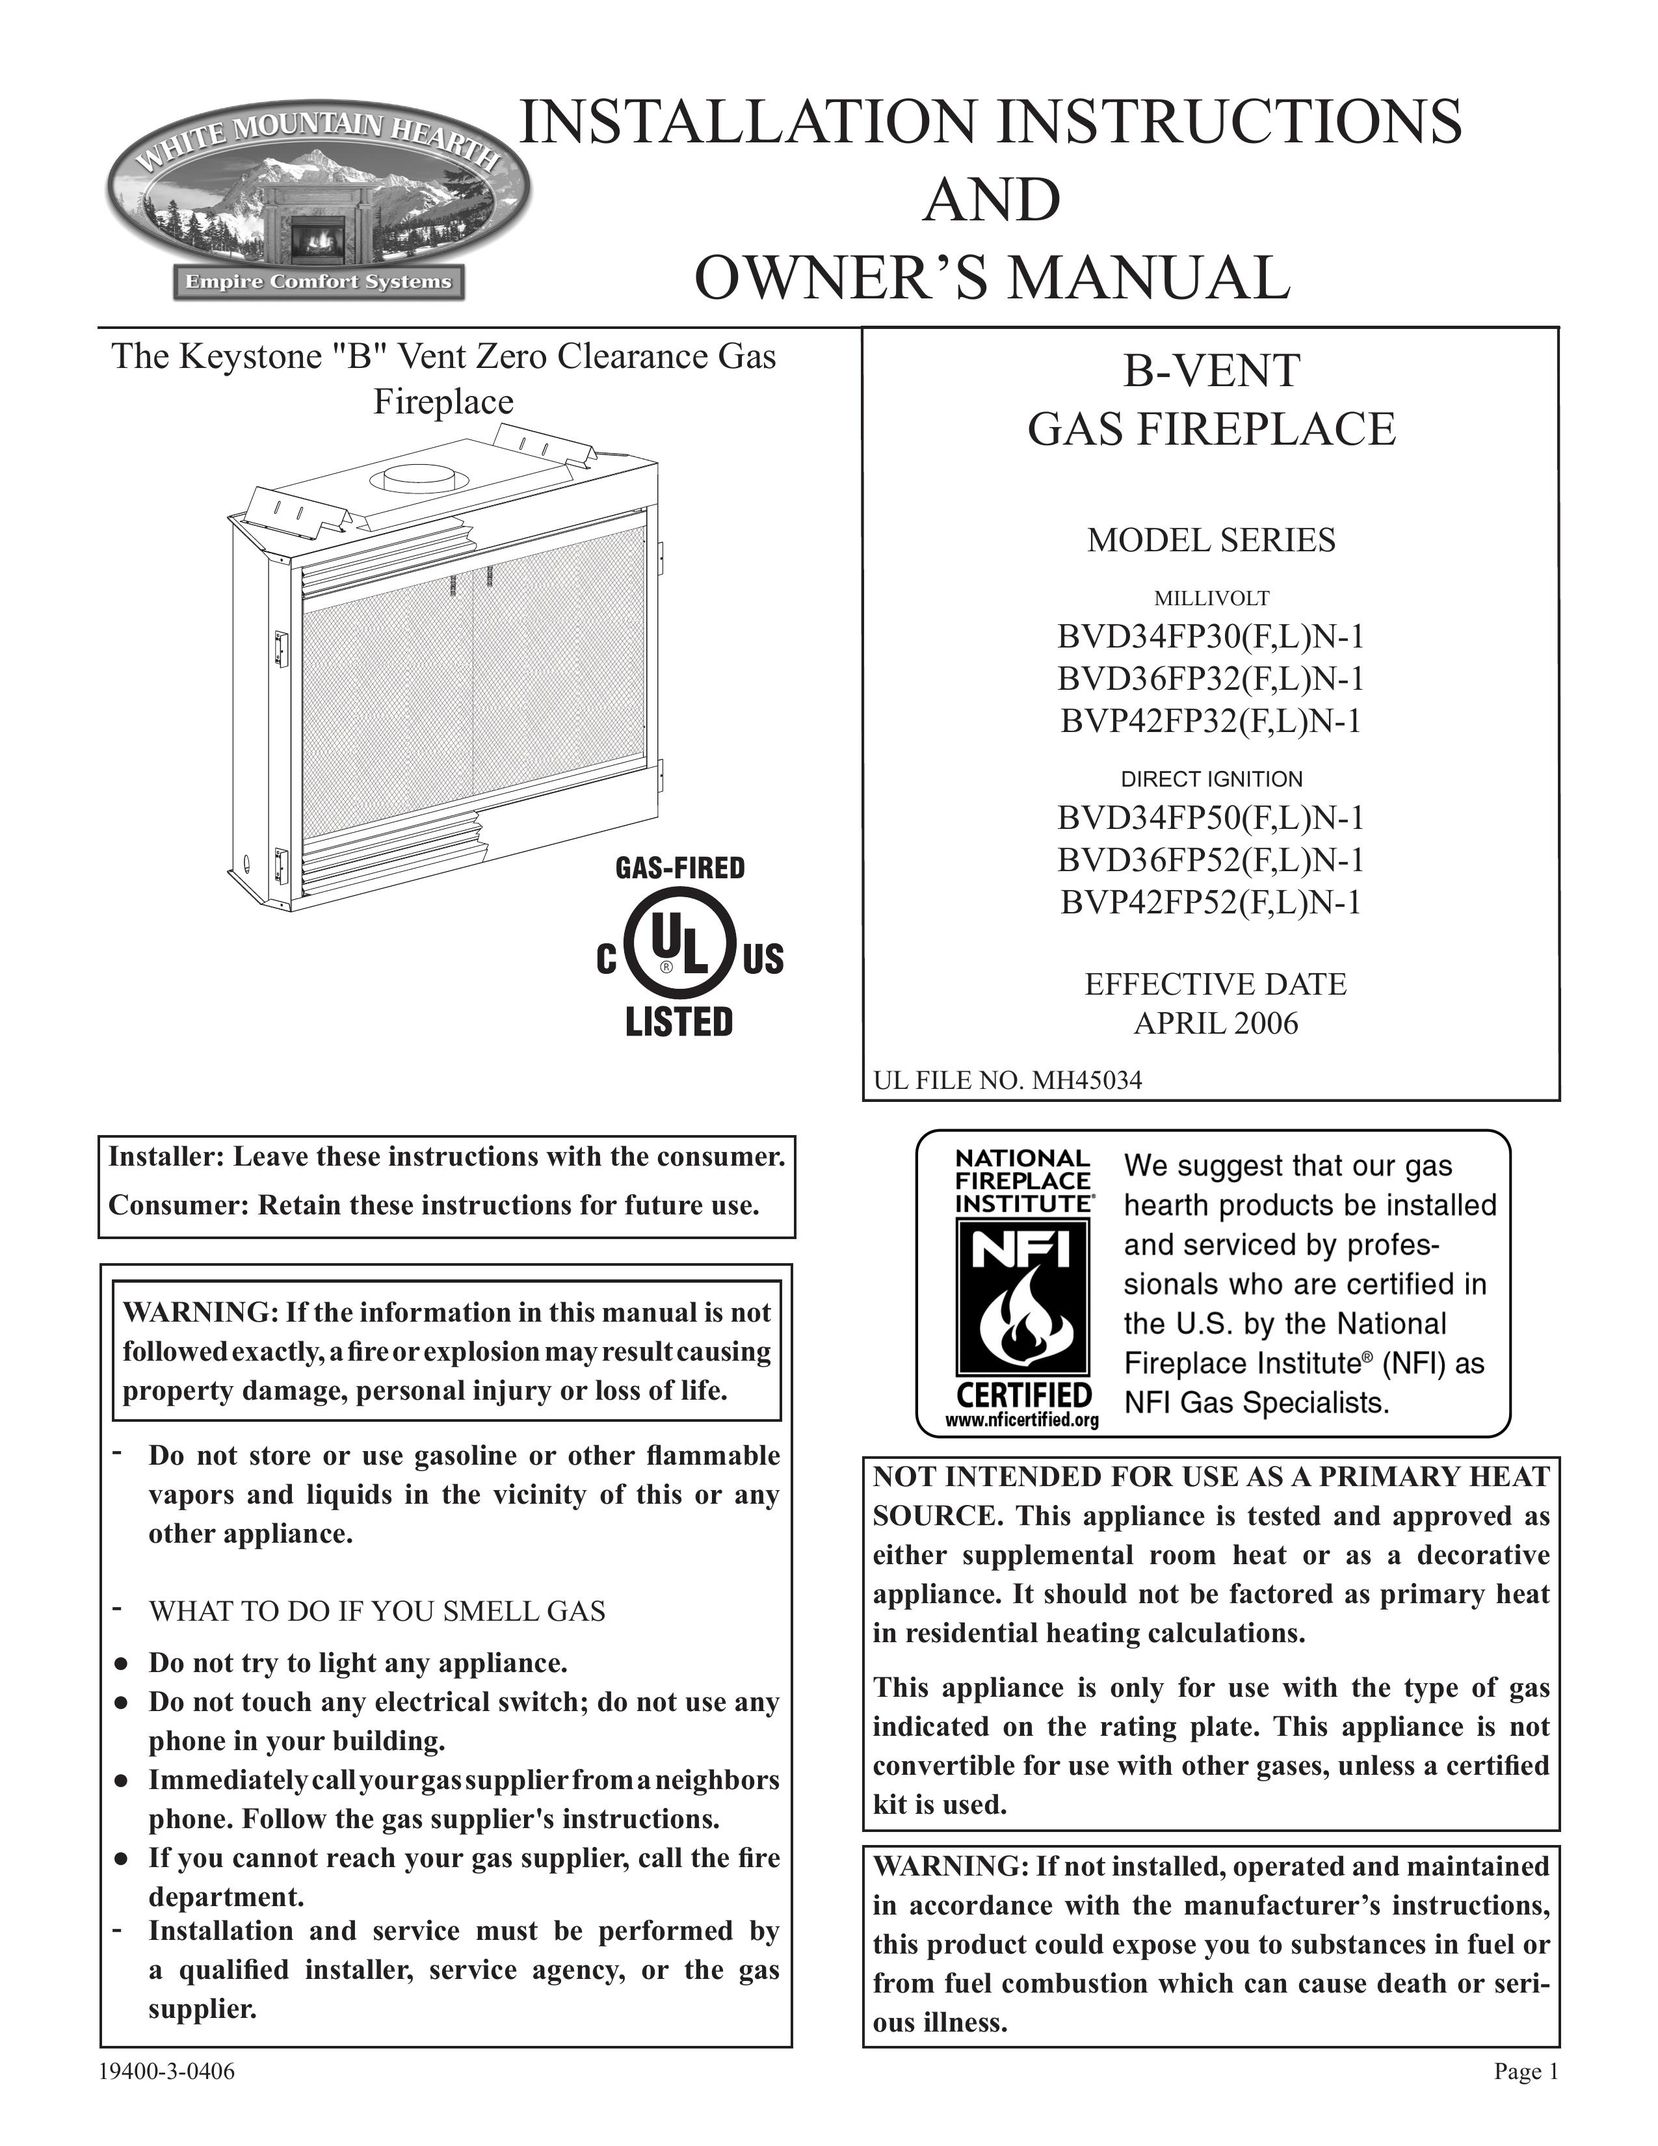 Empire Comfort Systems BVP42FP52 Indoor Fireplace User Manual